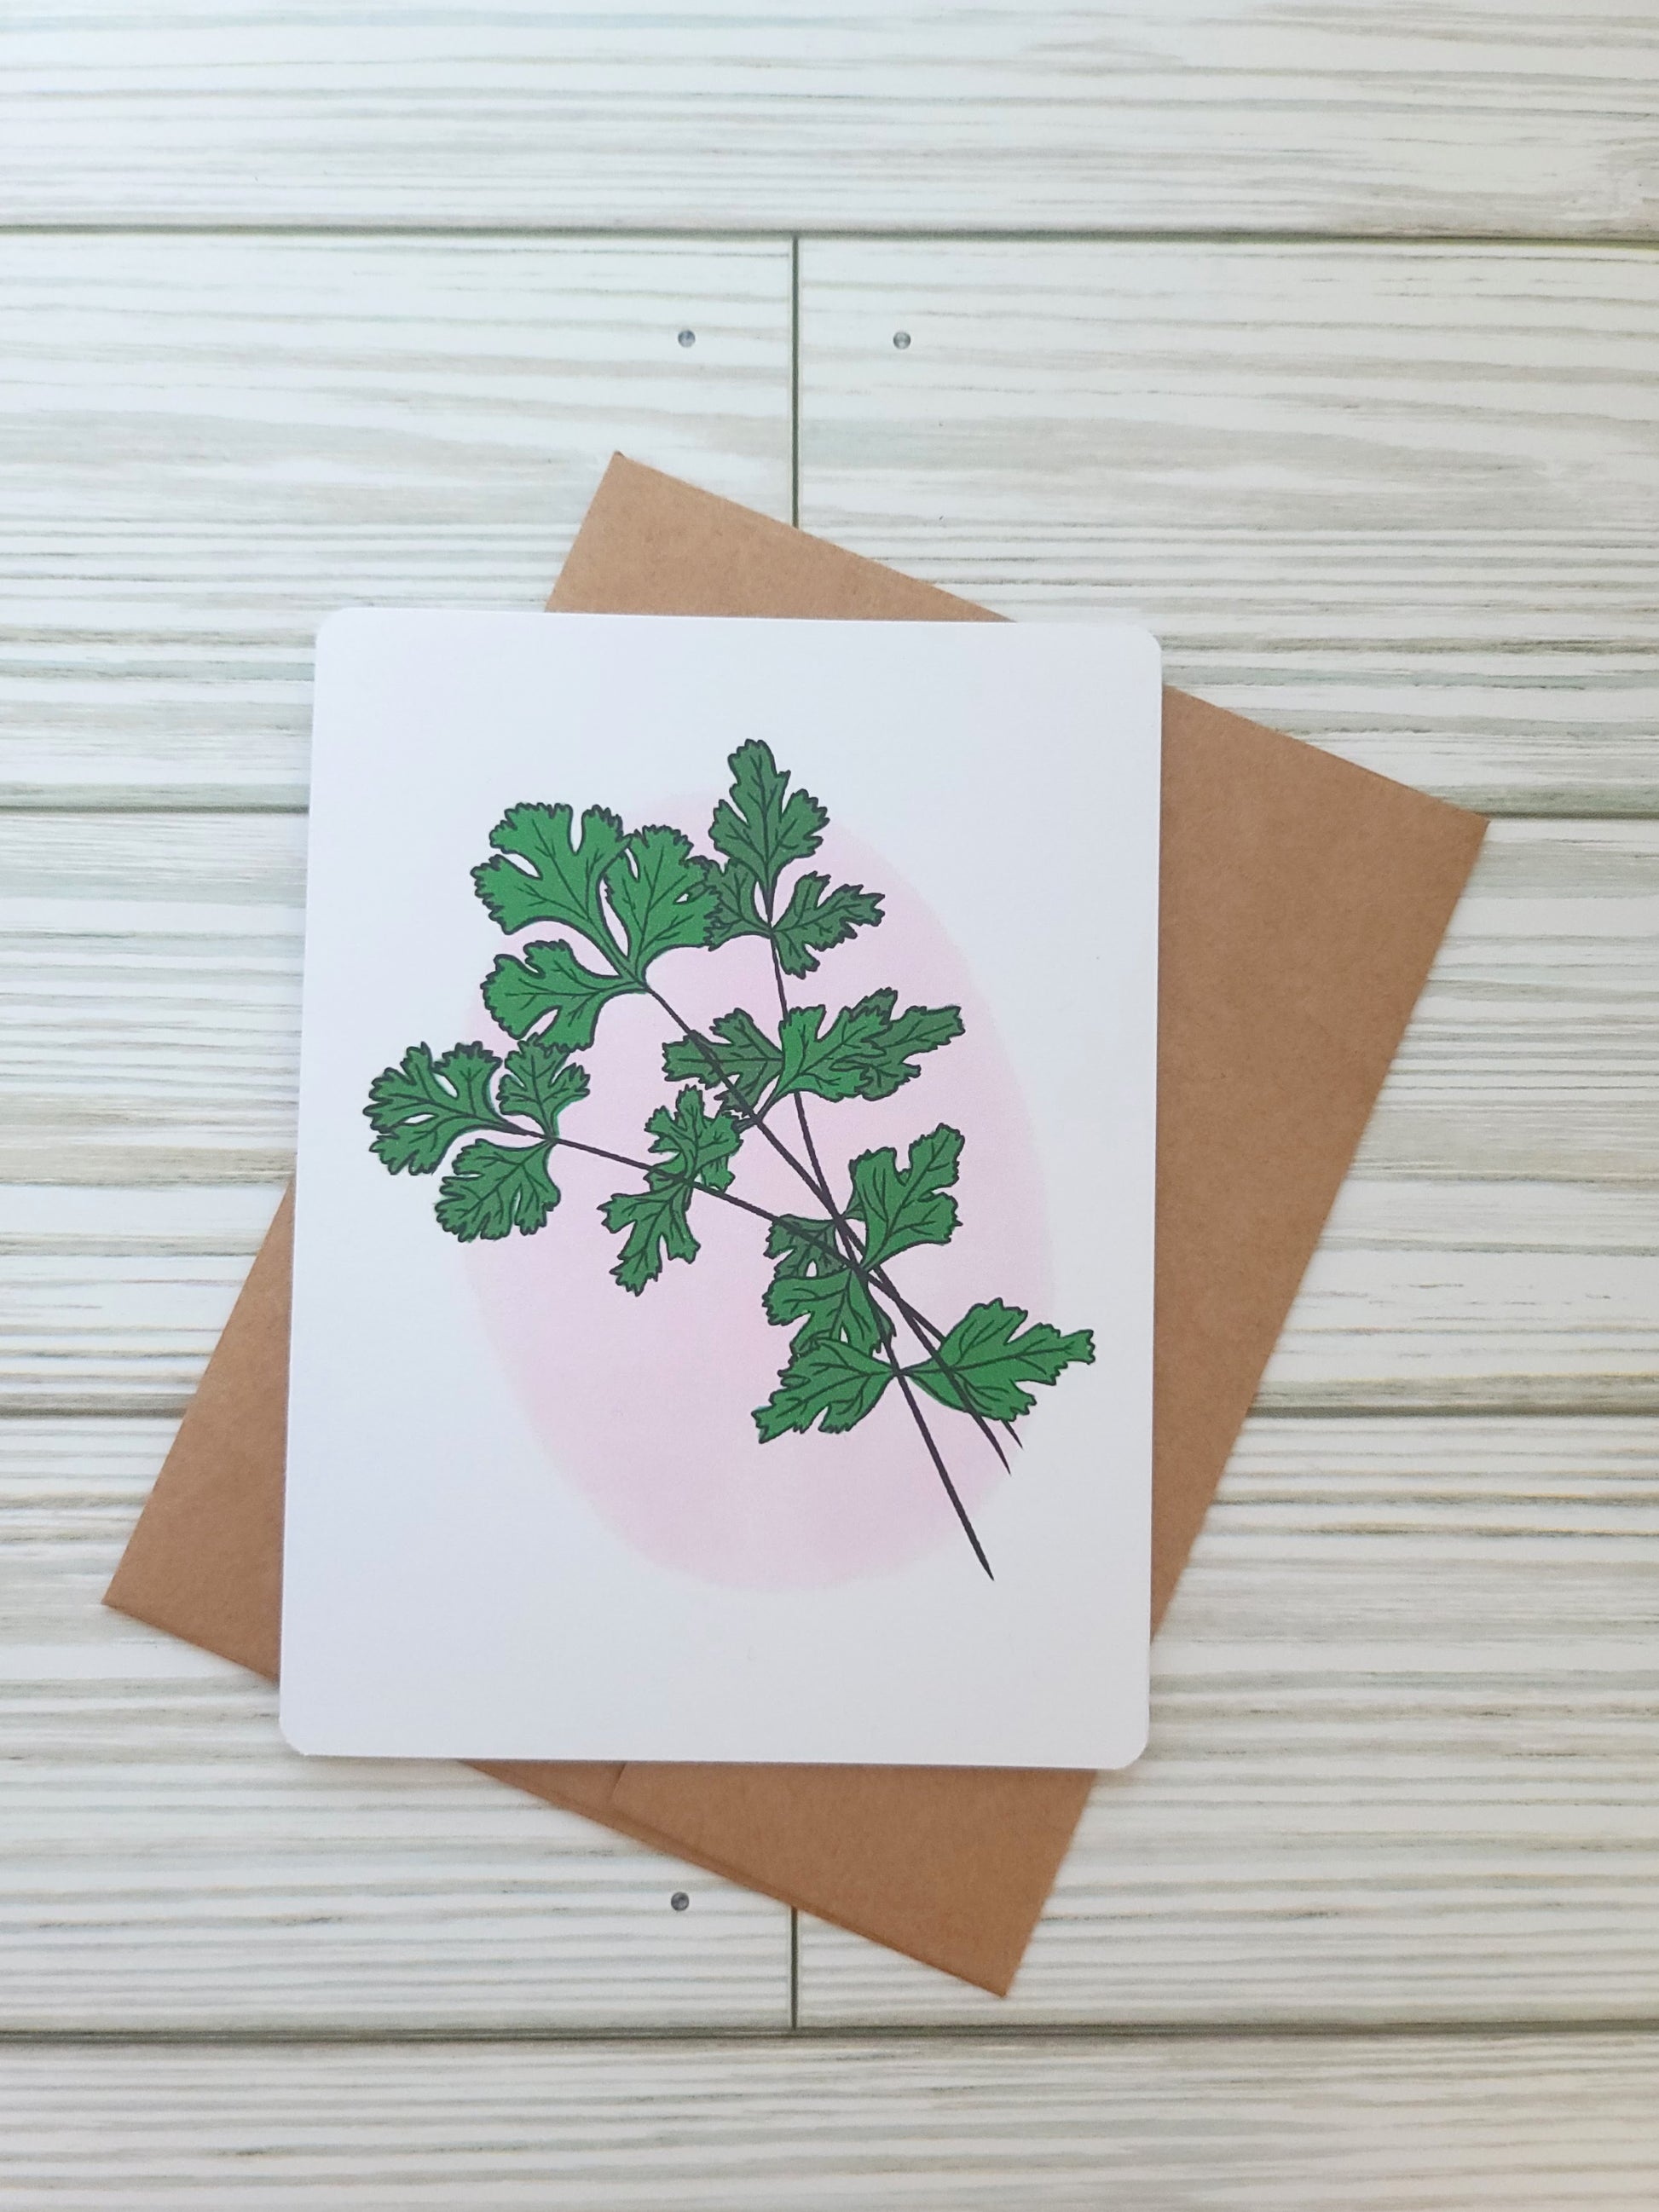 Cilantro Handmade Greeting Card - Recycled Paper and Kraft Envelope - Overhead Shot